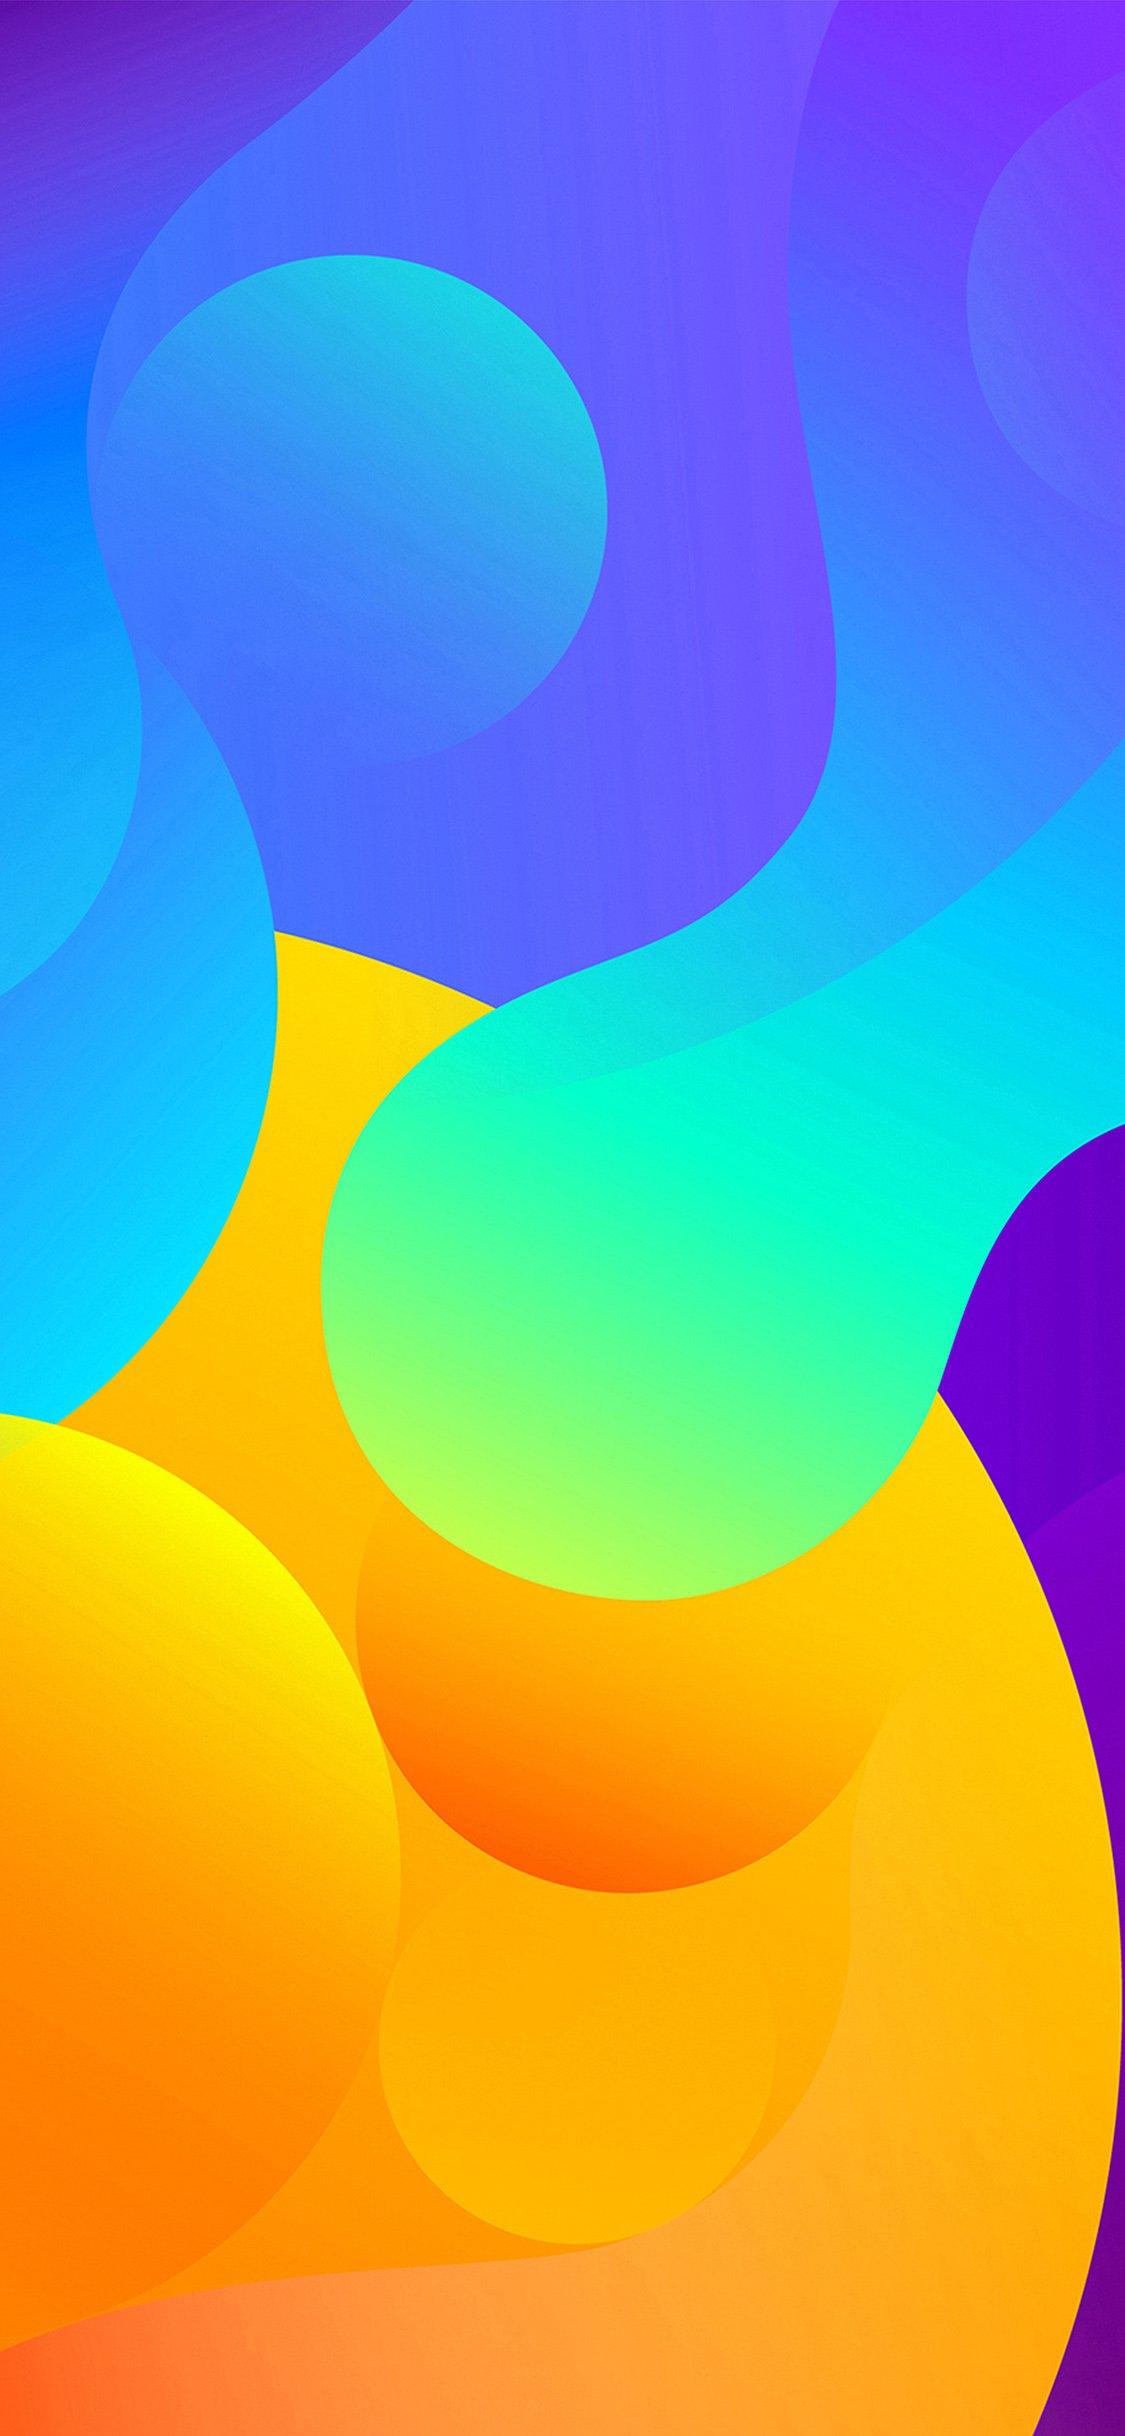 iPhone 8 wallpaper. abstract art color